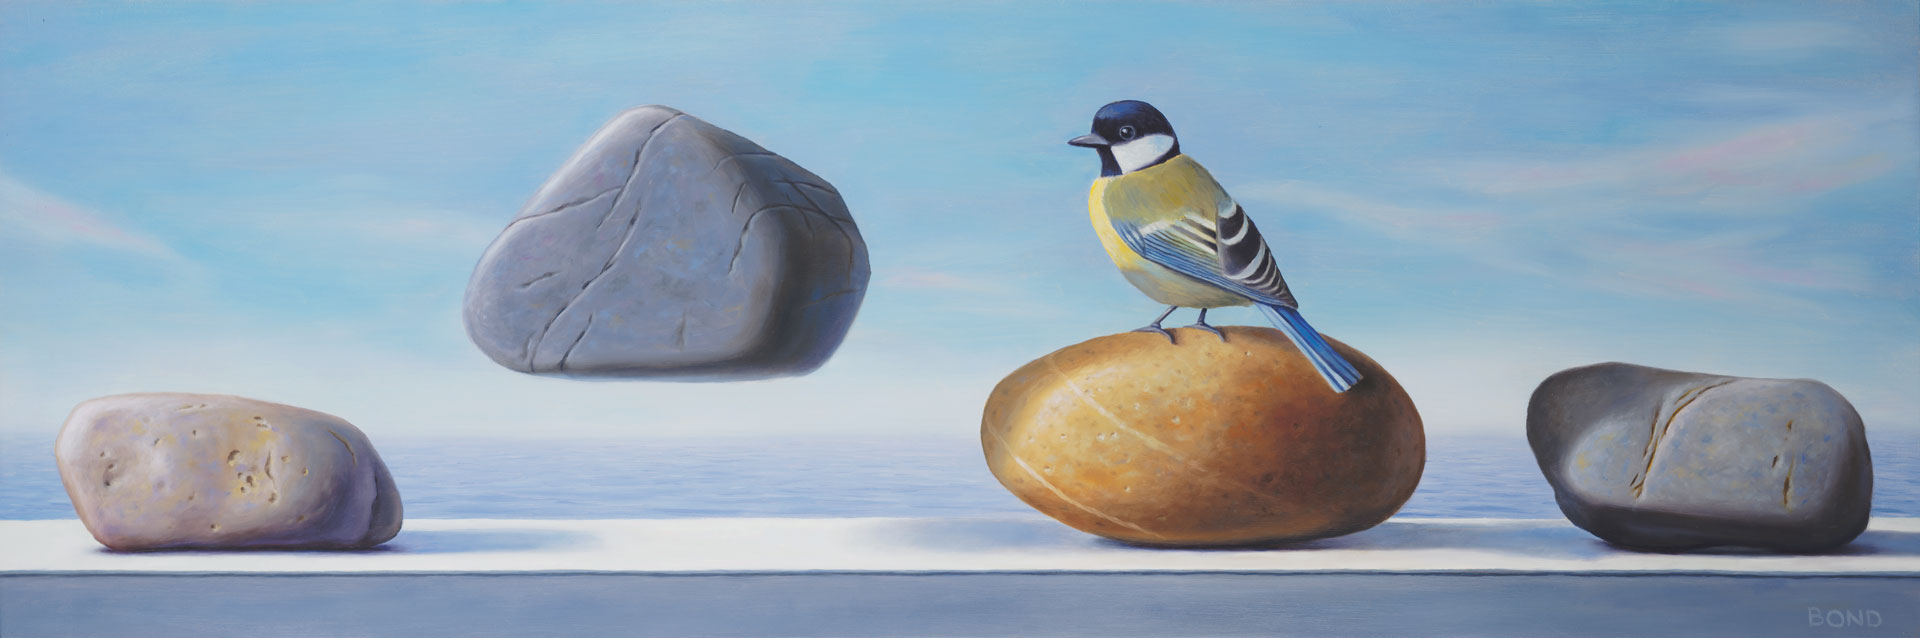 Envy, painting of a bird sitting on a rock staring at a floating rock, painting with ocean sea background, art with bird and rocks, painting with floating stones, art meaning folly, art about being envious, soulful uplifting inspirational art, soul stirring illusion art, romantic art,  surrealism, surreal art, dreamlike imagery, fanciful art, fantasy art, dreamscape visual, metaphysical art, spiritual painting, metaphysical painting, spiritual art, whimsical art, whimsy art, dream art, fantastic realism art, limited edition giclee, signed art print, fine art reproduction, original magic realism oil painting by Paul Bond